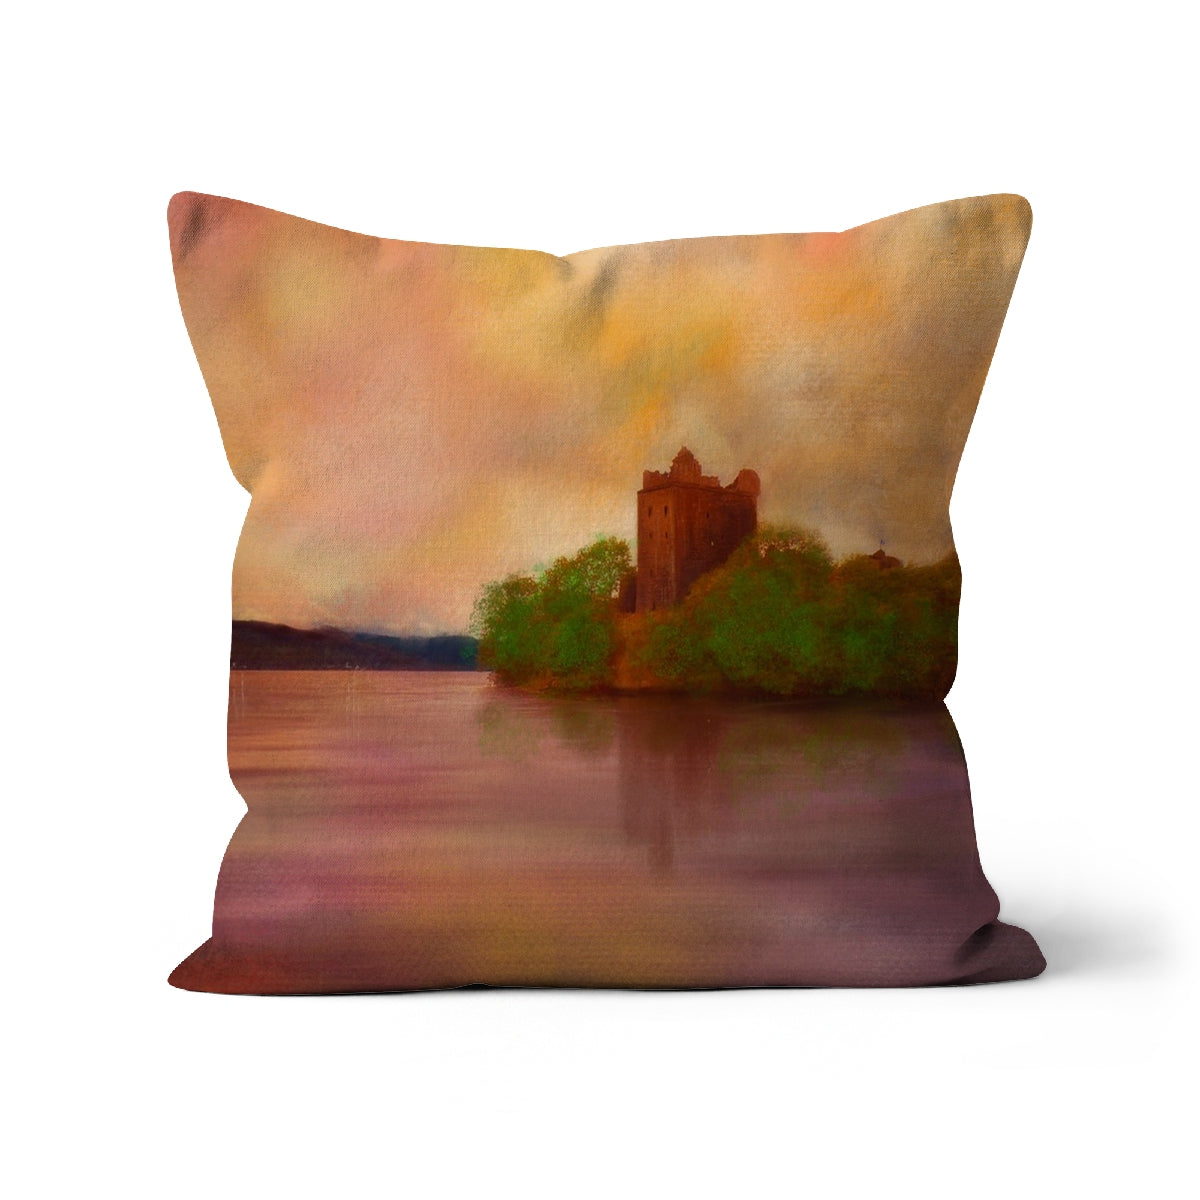 Urquhart Castle Art Gifts Cushion-Cushions-Historic & Iconic Scotland Art Gallery-Faux Suede-22"x22"-Paintings, Prints, Homeware, Art Gifts From Scotland By Scottish Artist Kevin Hunter